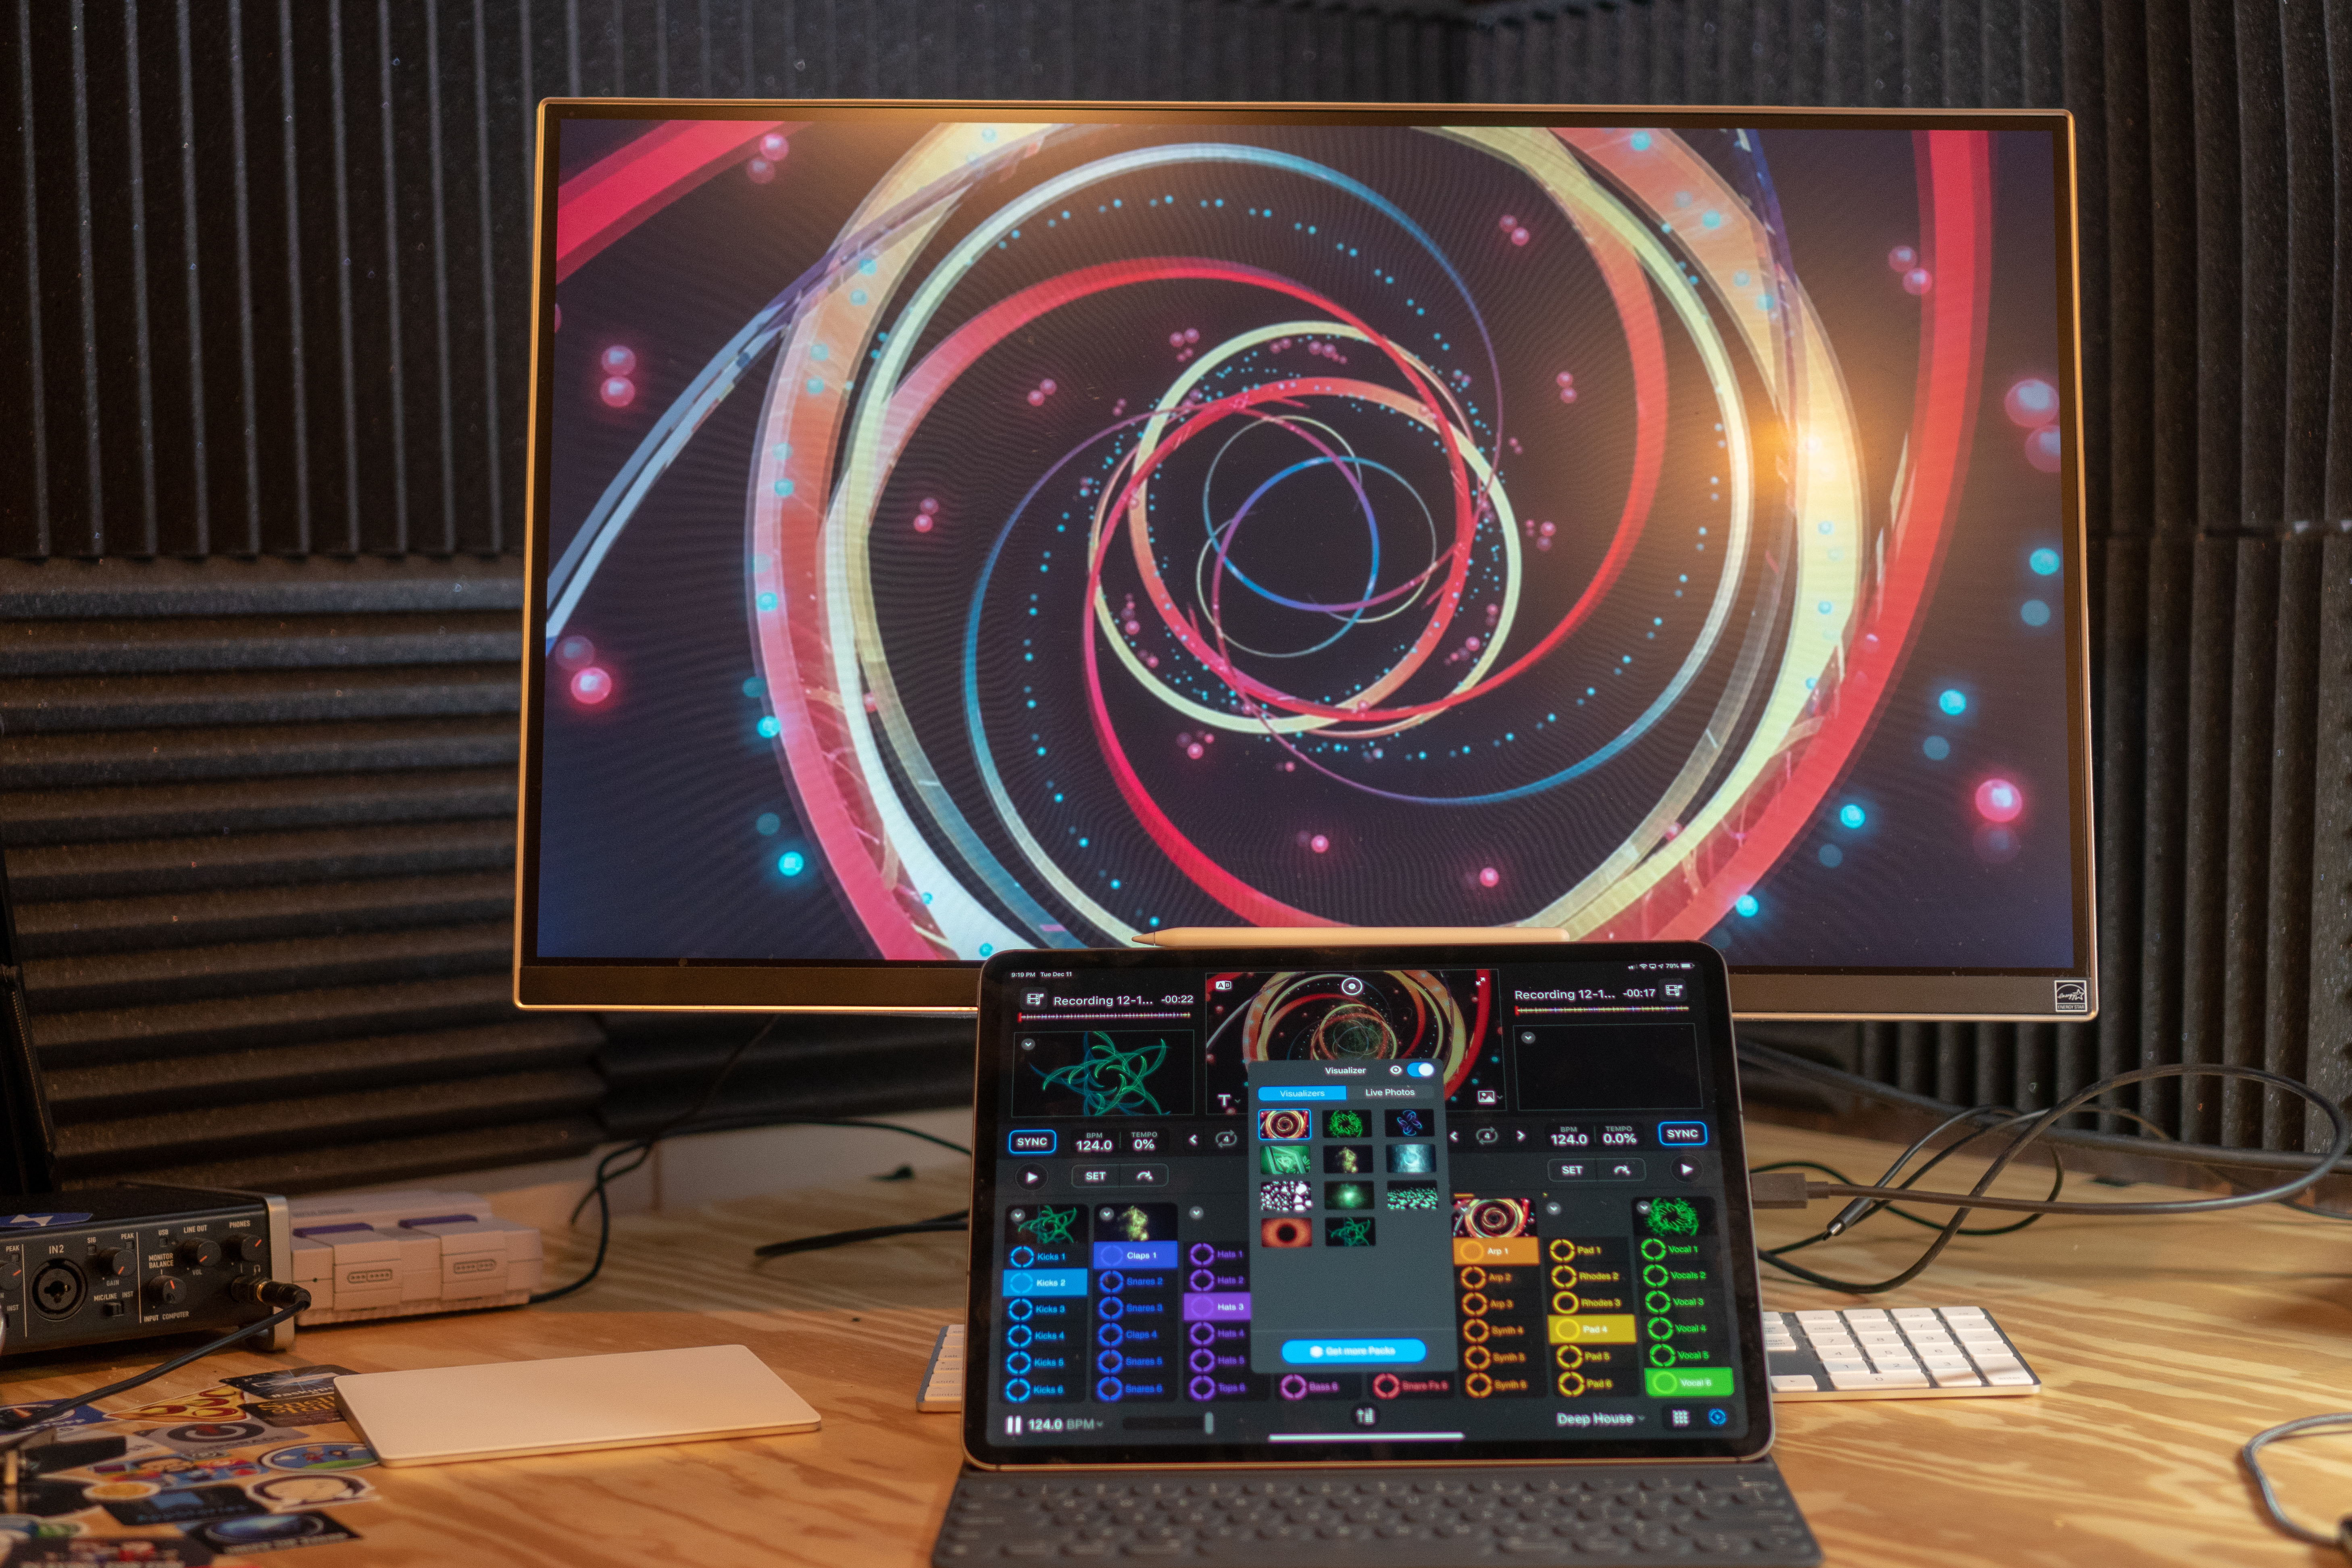 Mixing audio and video loops connected to an external display.